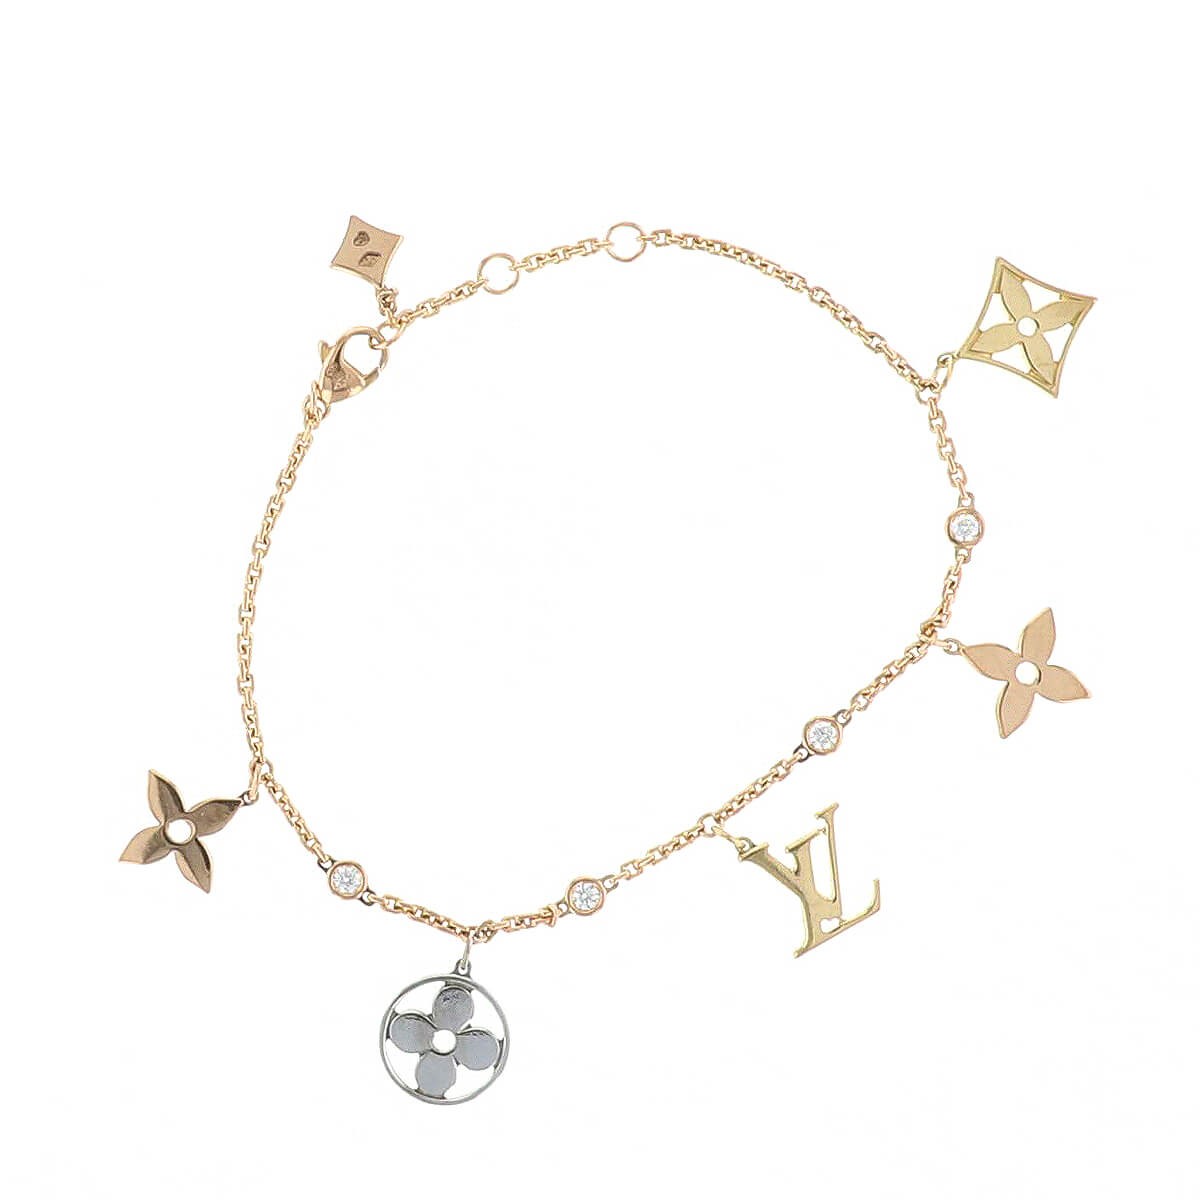 Shop Louis Vuitton Idylle blossom charms necklace, 3 golds and